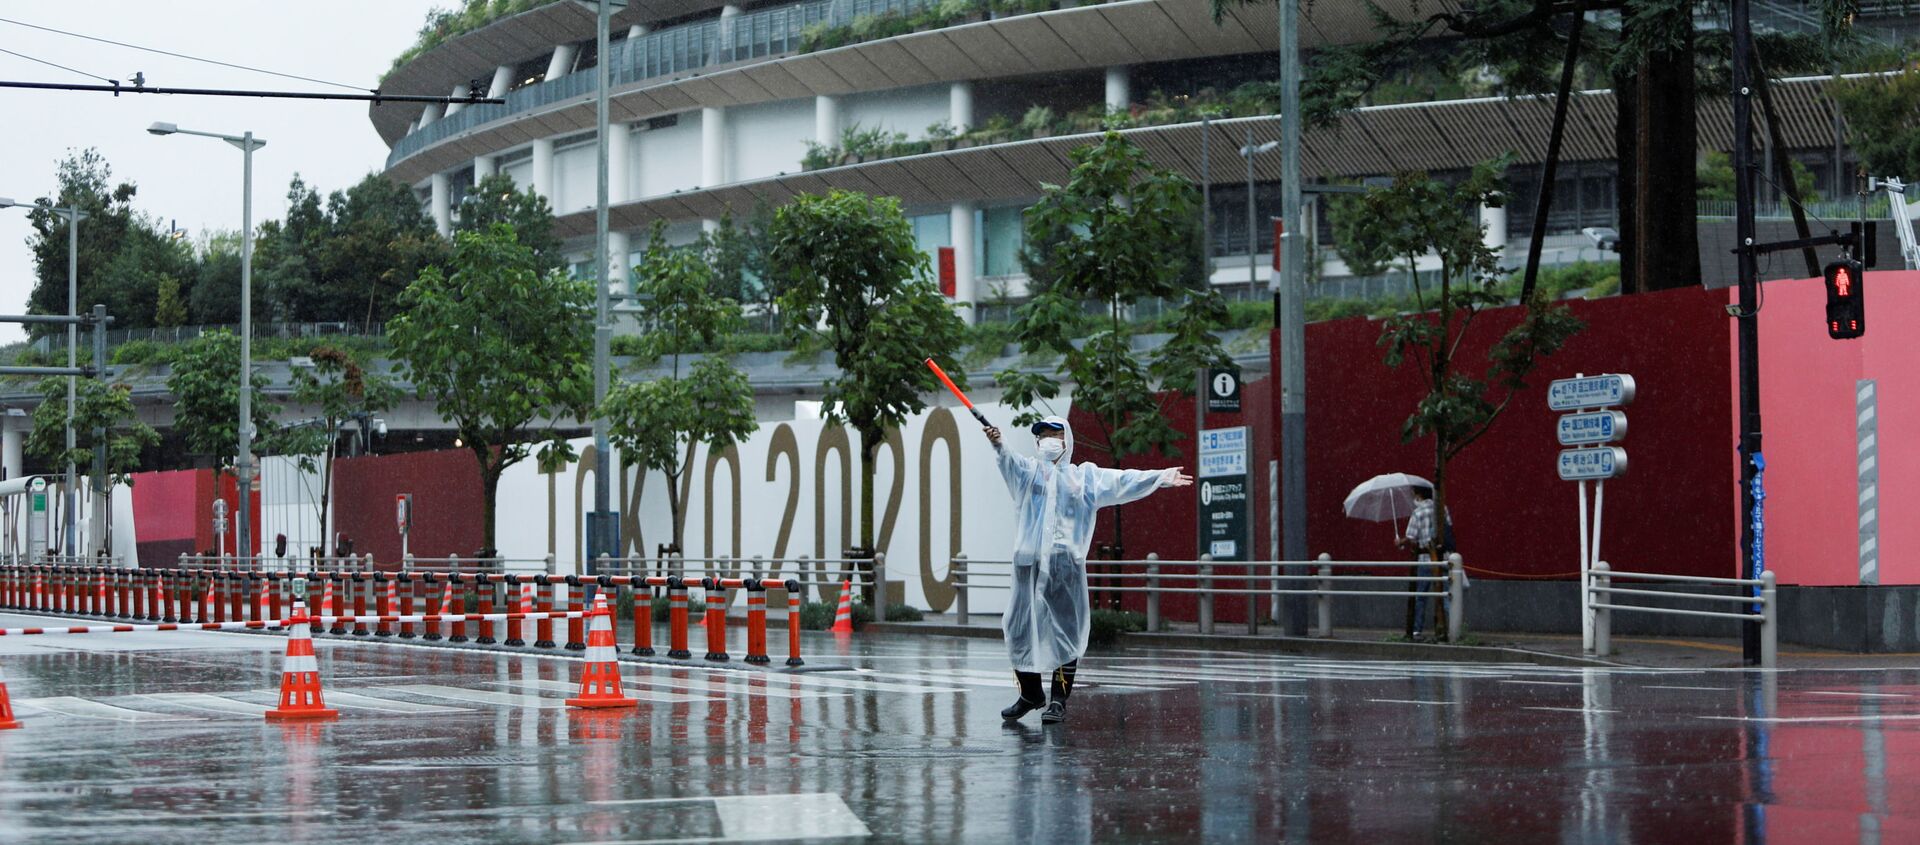 A policeman controls traffic outside the Olympic Stadium during a typhoon, on the last day of the Tokyo 2020 Olympic Games in Tokyo, Japan August 8, 2021 - Sputnik International, 1920, 09.08.2021